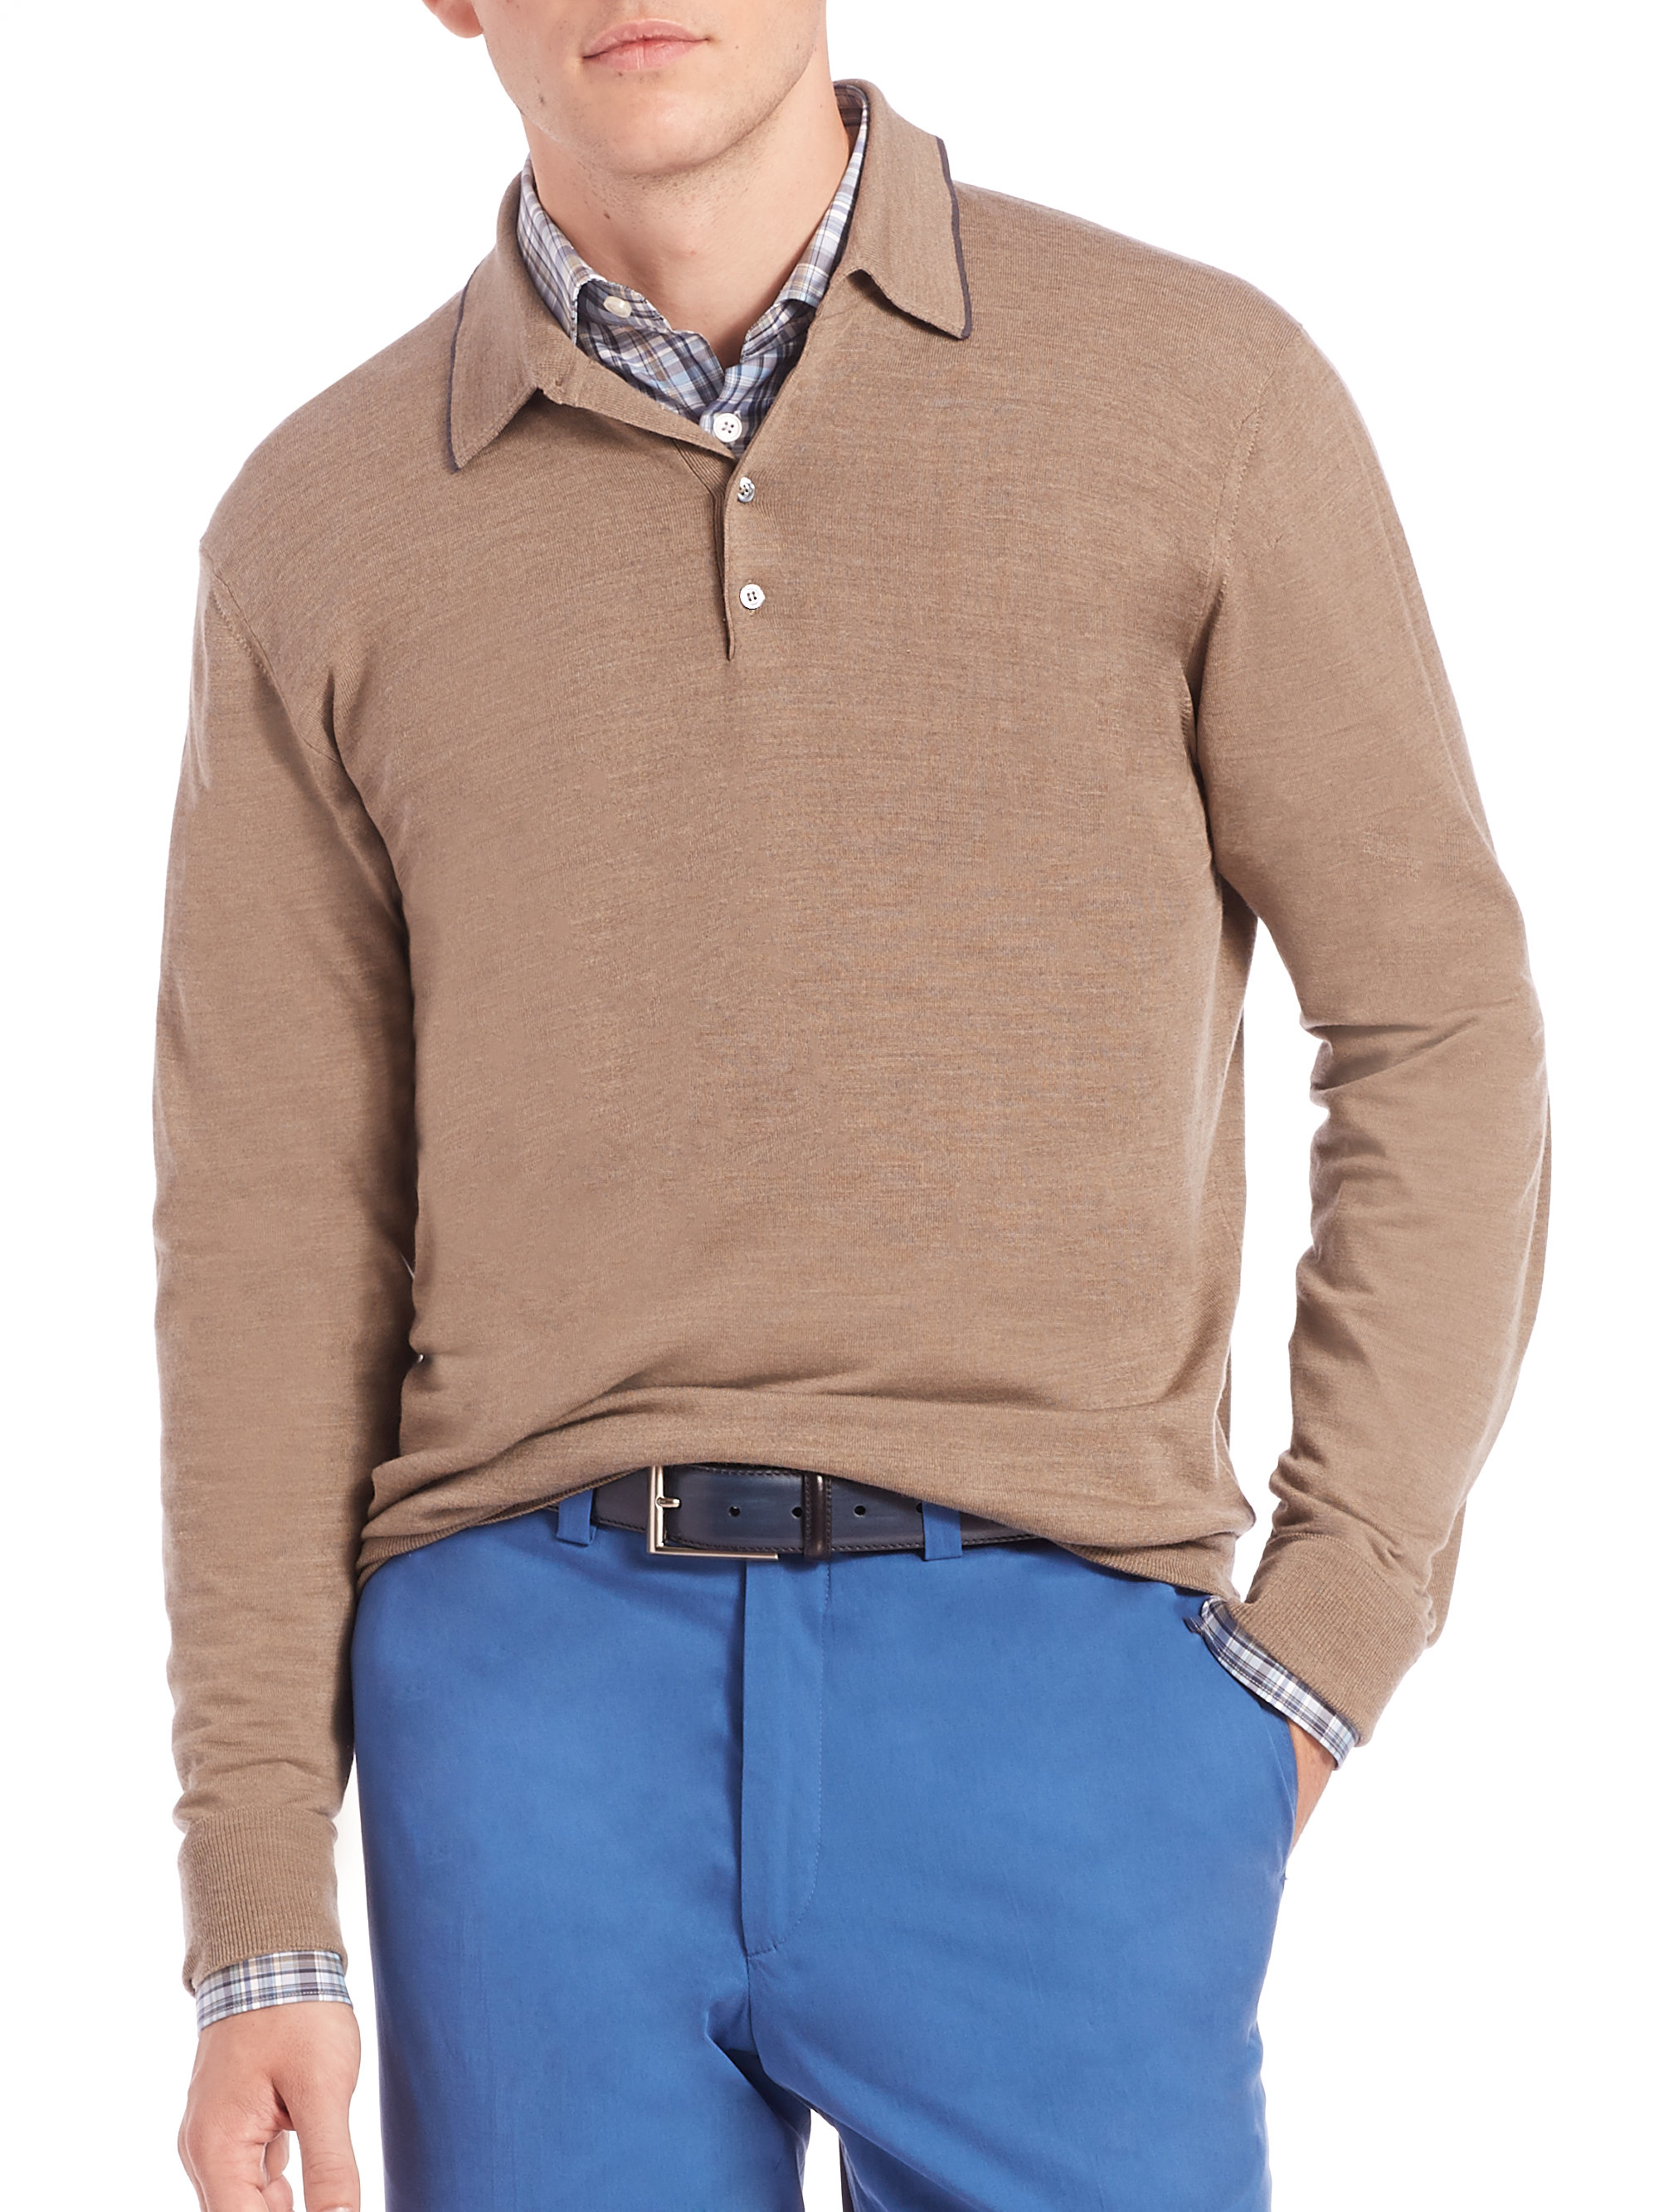 Lyst - Saks Fifth Avenue Long-sleeve Merino Wool Polo in Natural for Men